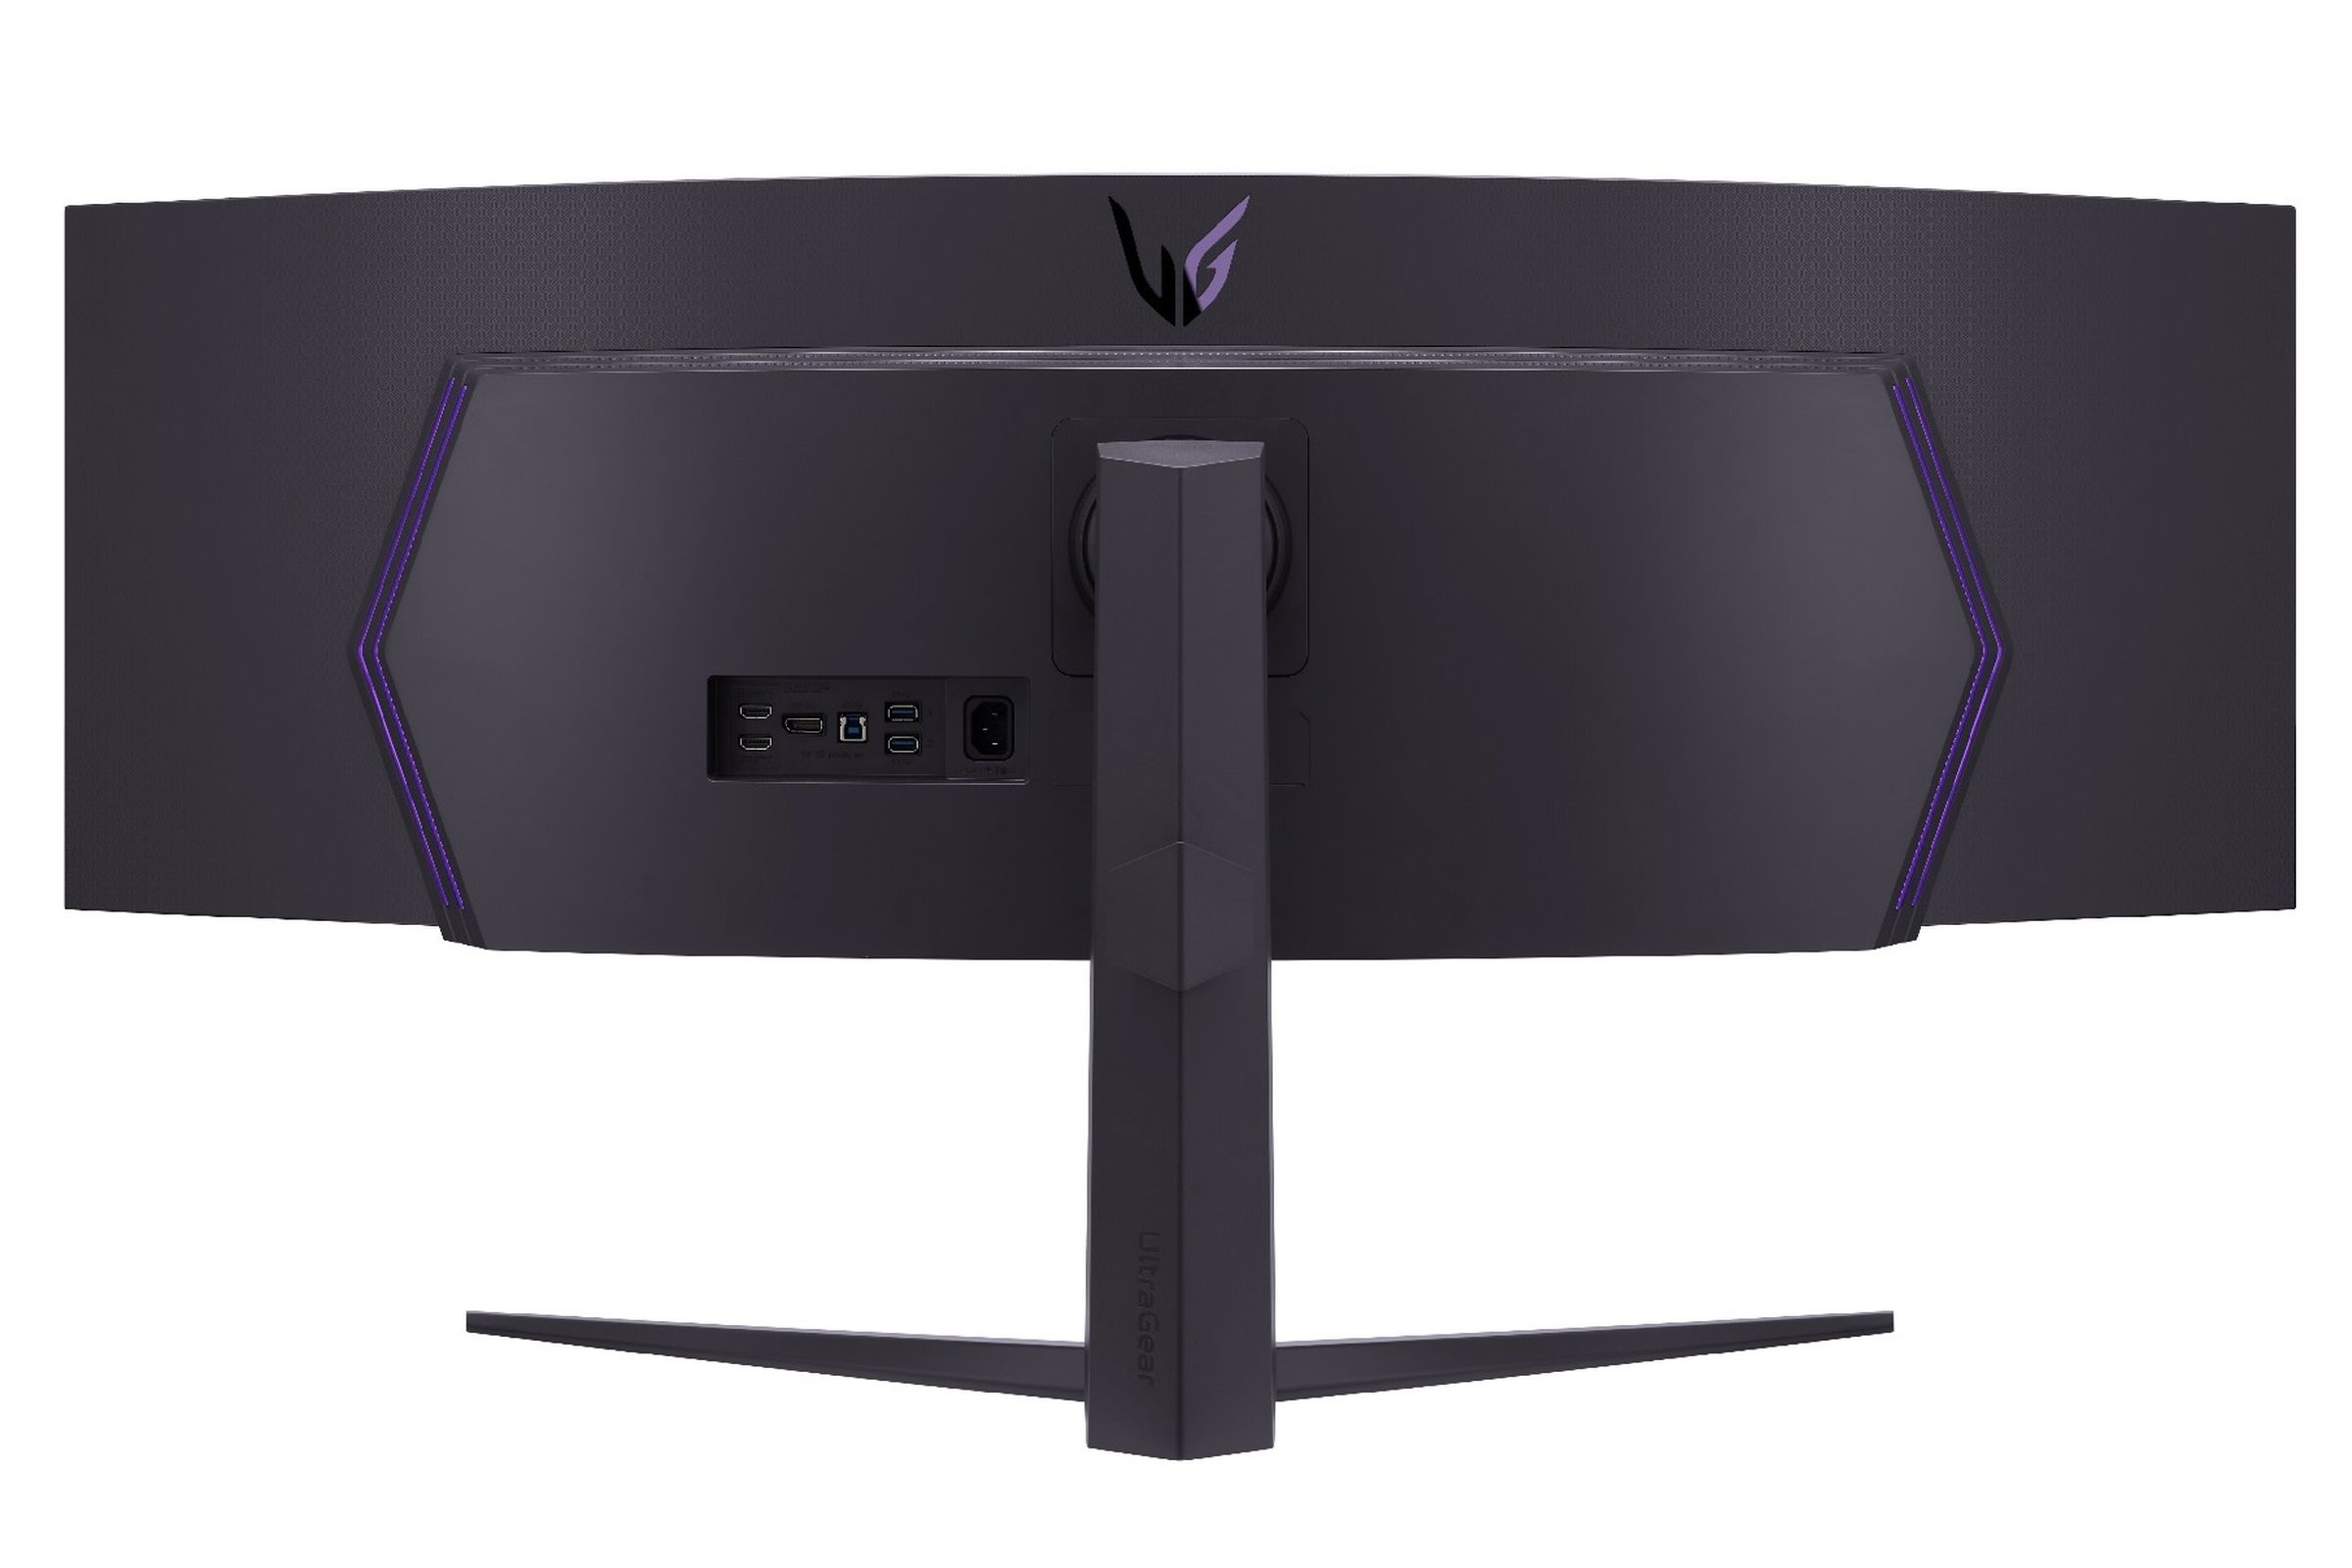 LG ultragear curved monitor rear with purple contour led strips in a bracket shape and shiny UG logo on the top.